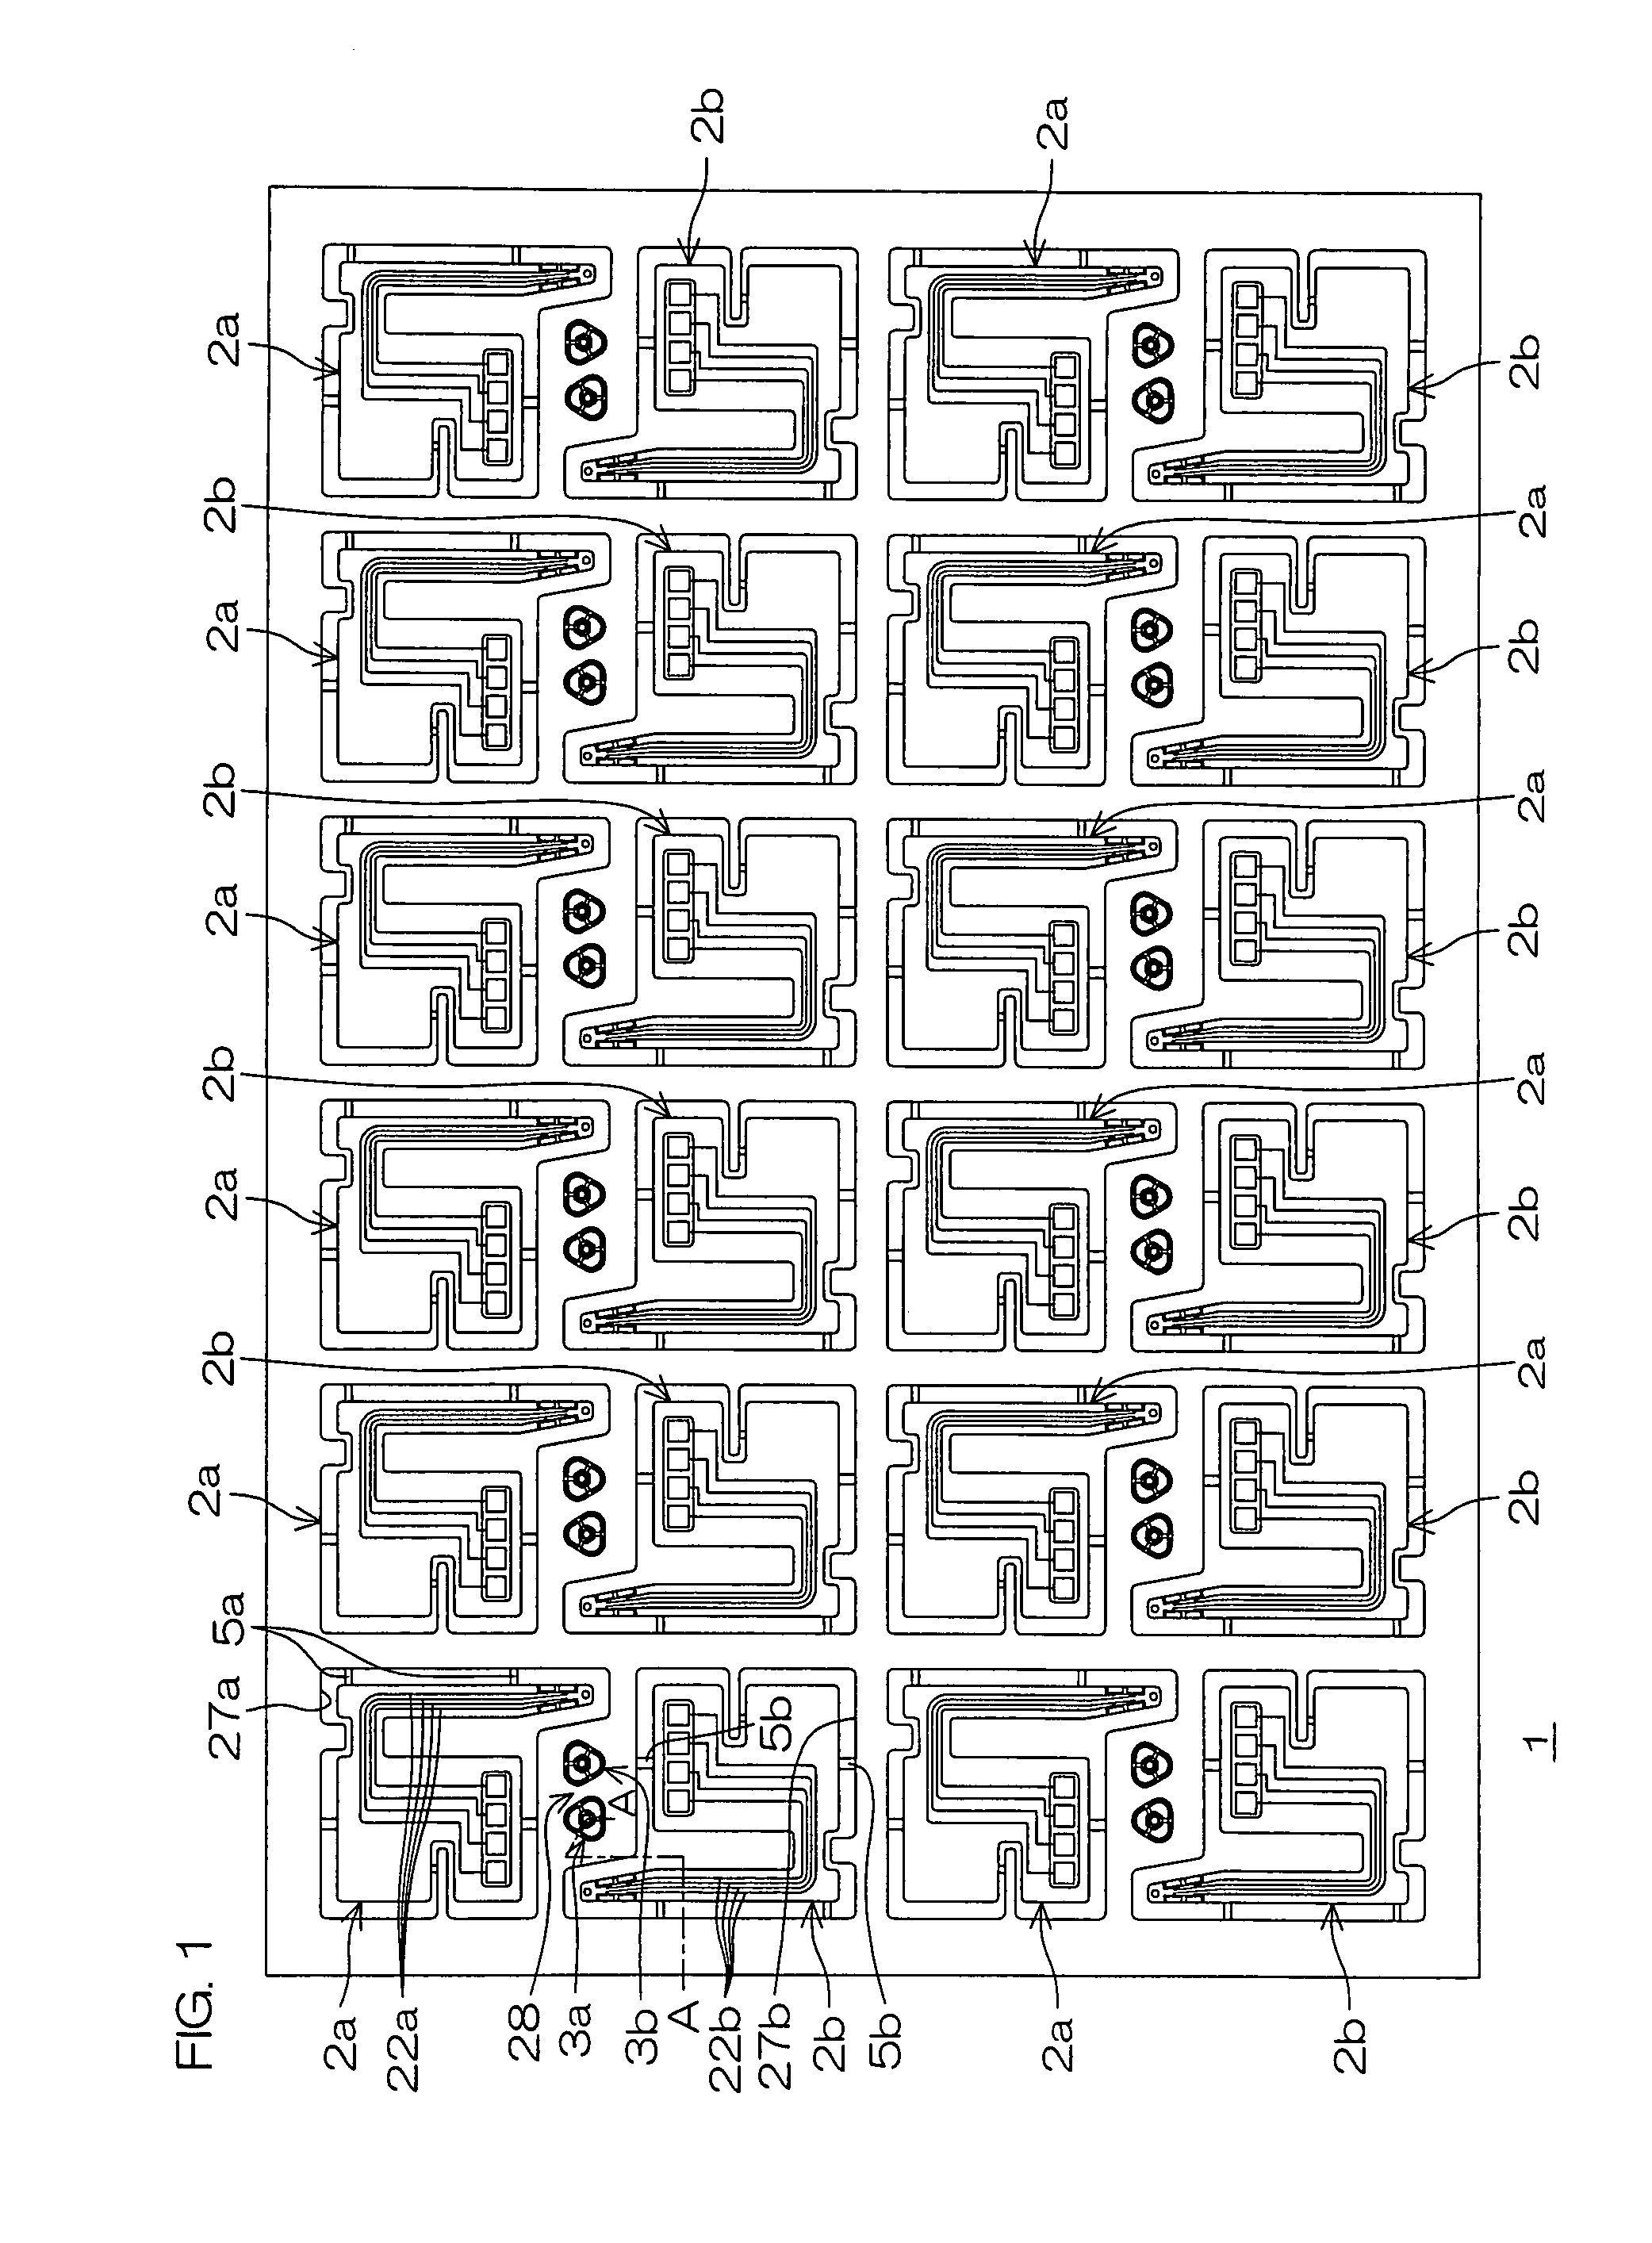 Wired circuit board assembly sheet